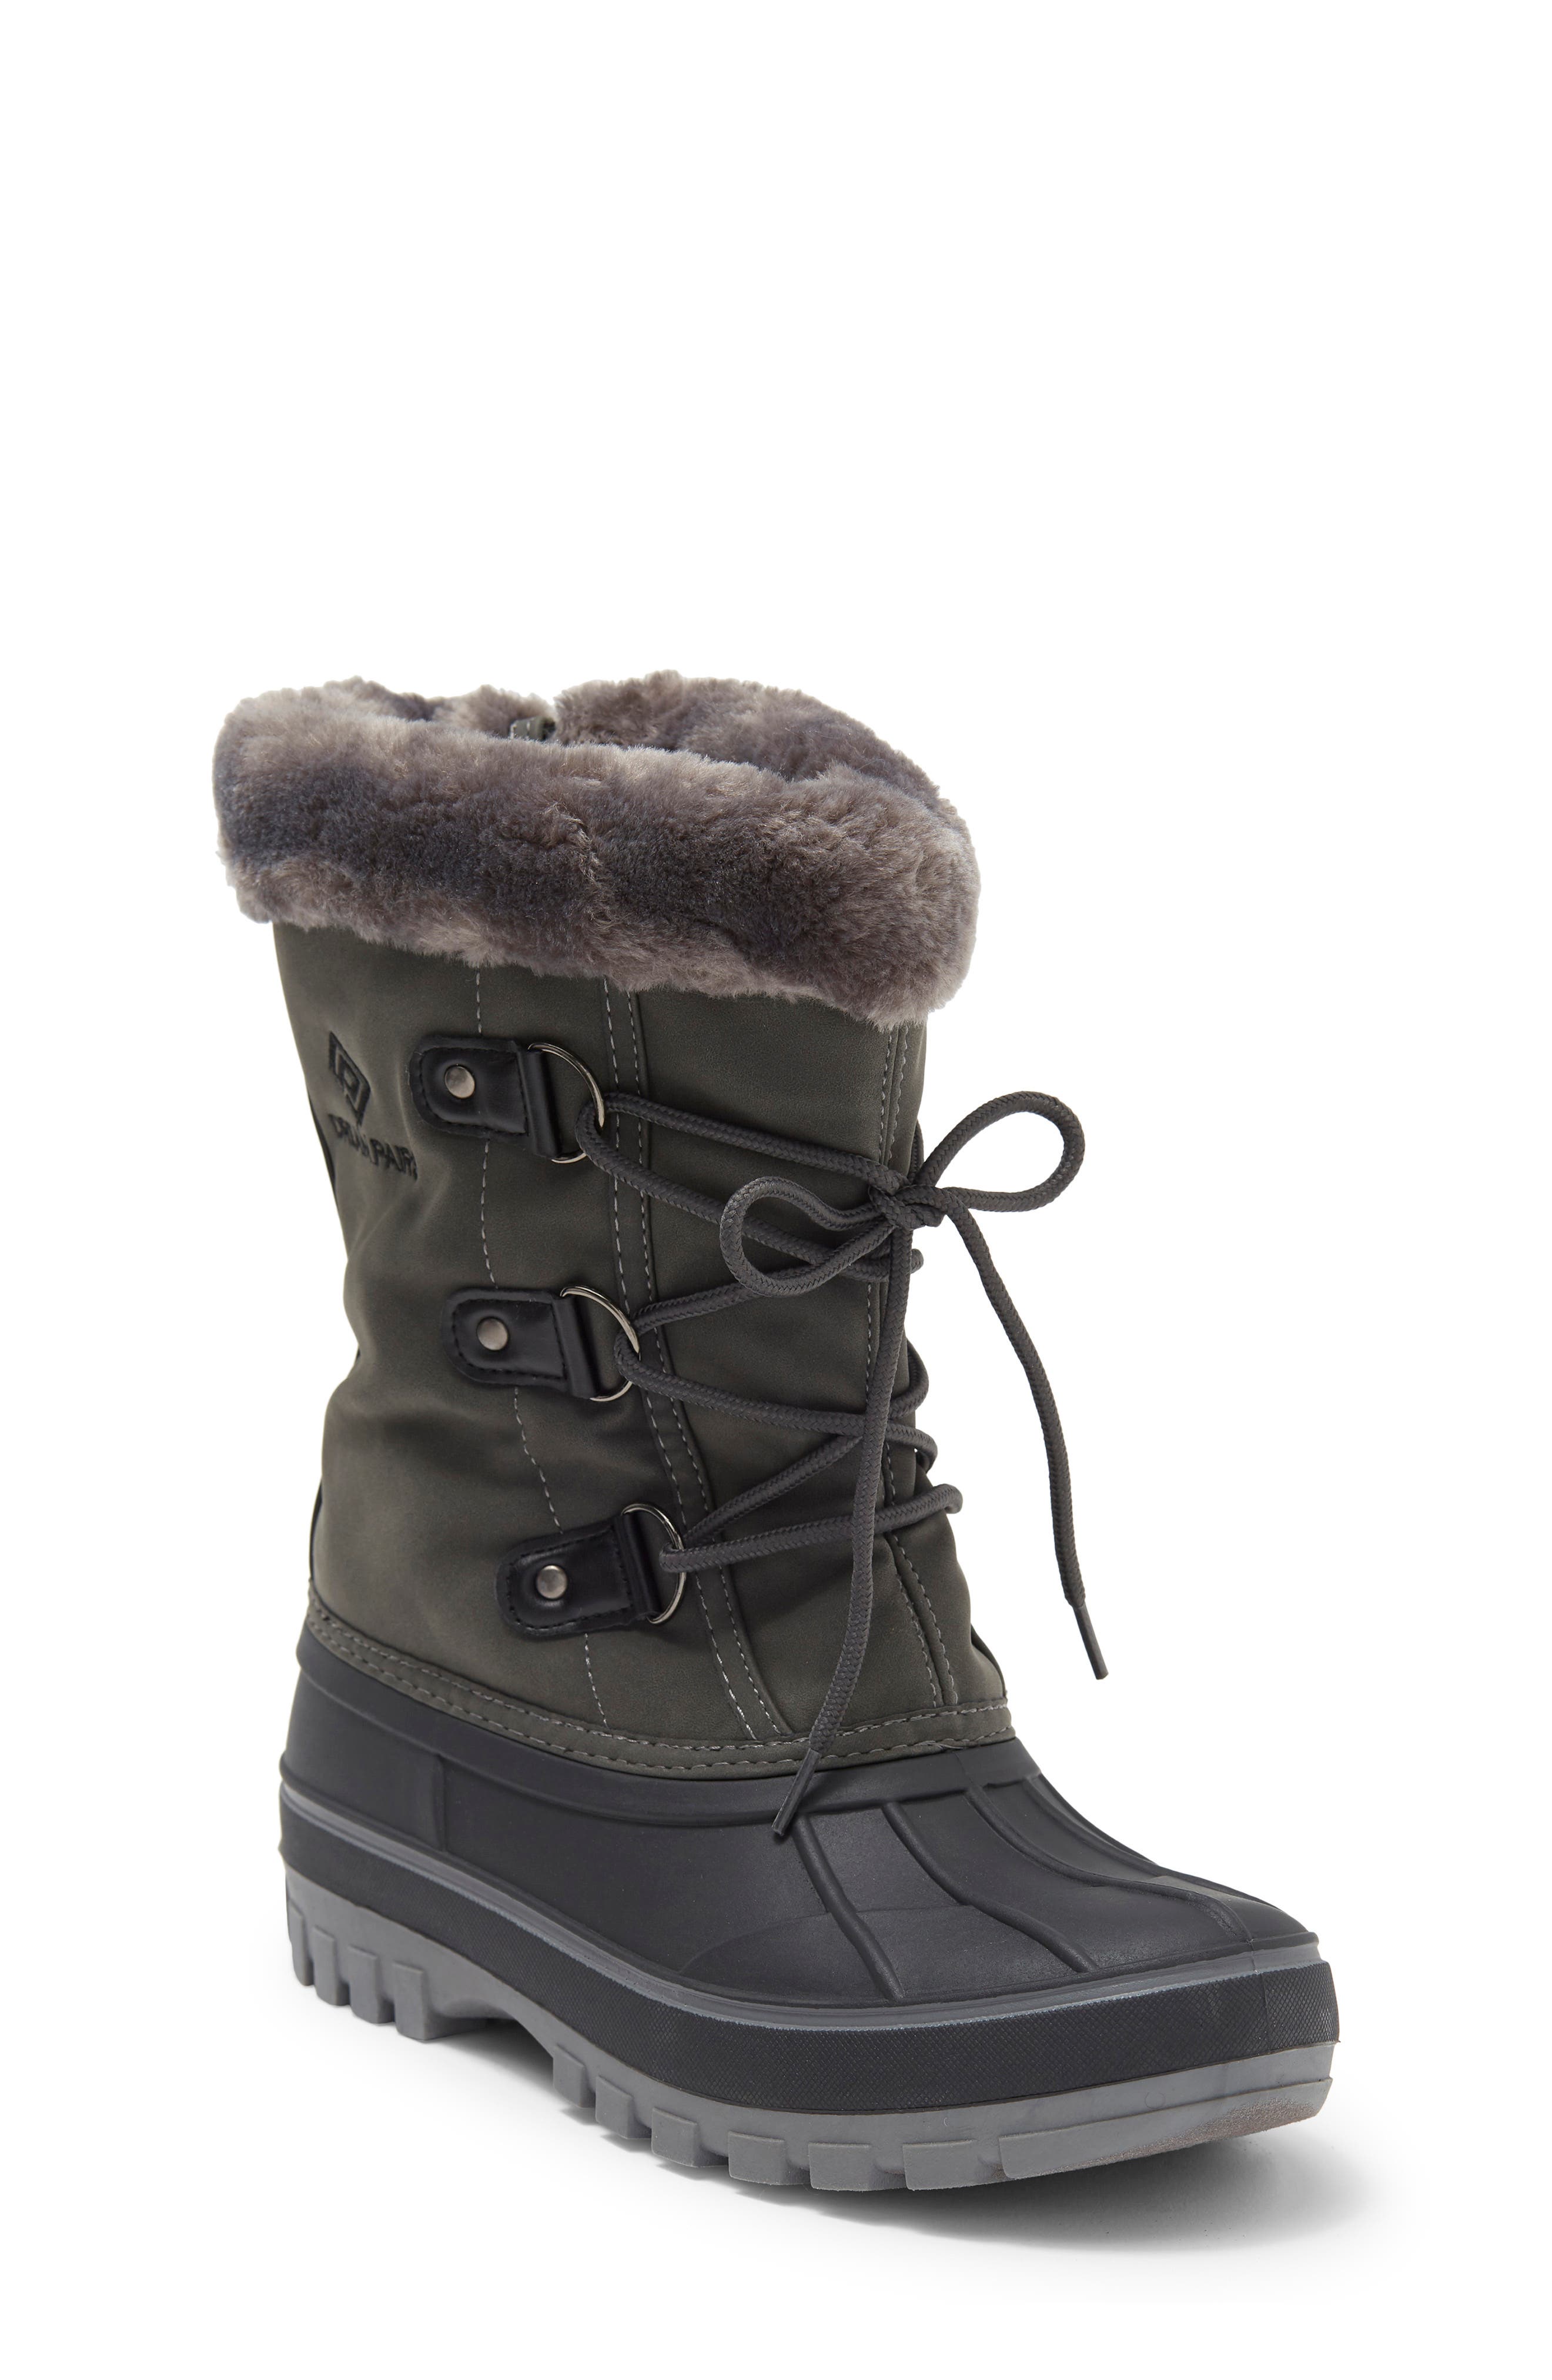 Kids' Forester Faux Fur Lined Snow Boot DREAM PAIRS